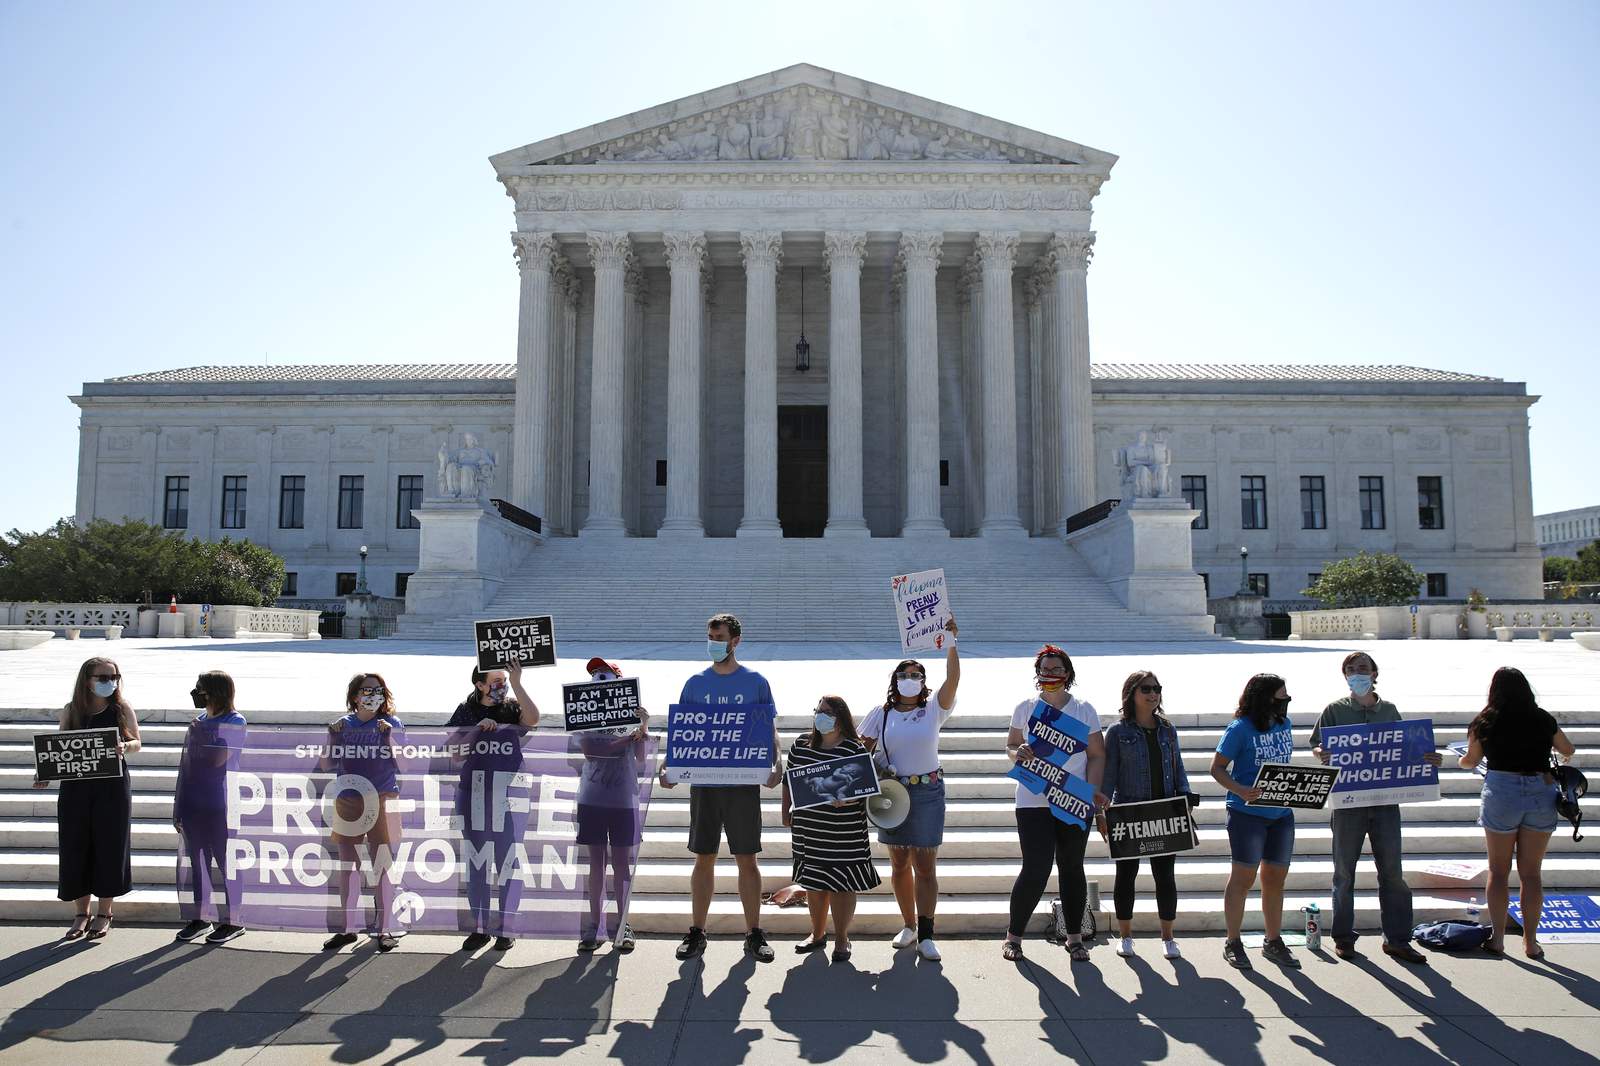 Abortion foes vent disappointment after Supreme Court ruling